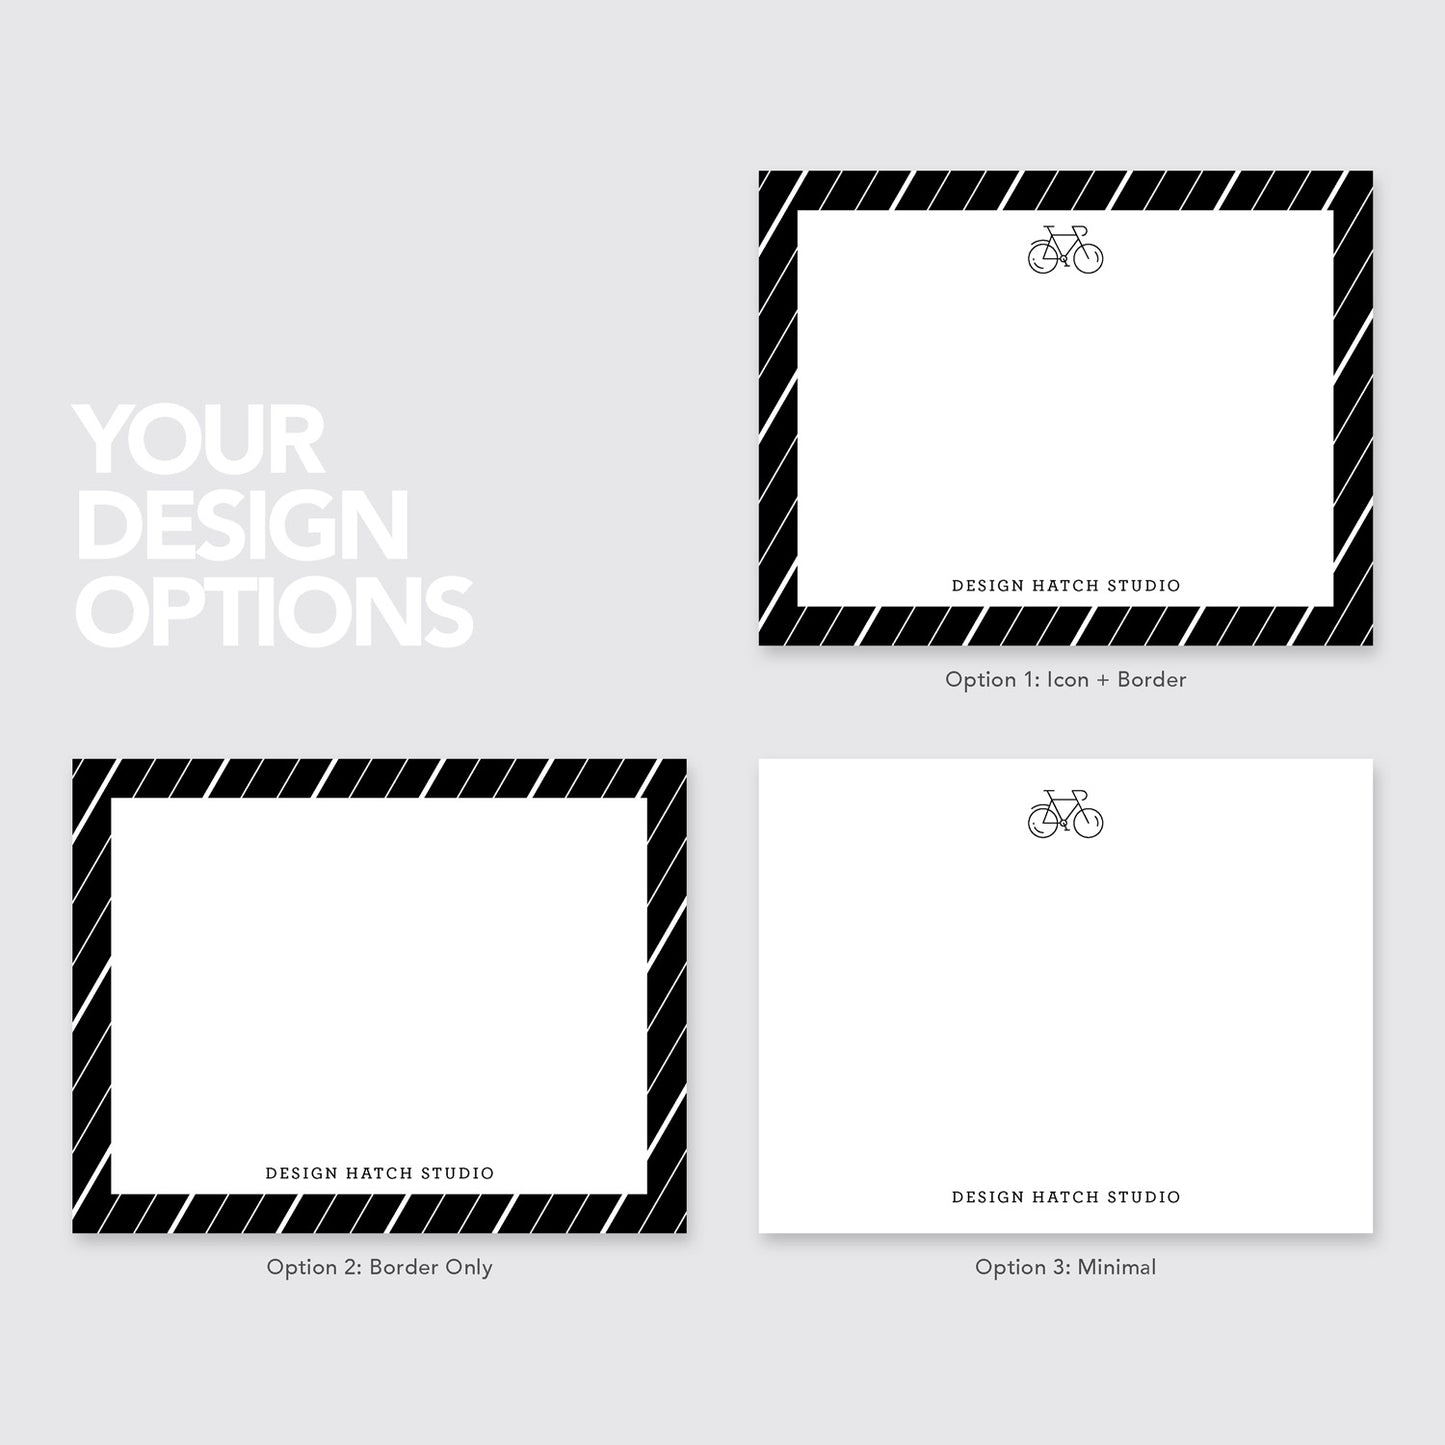 Bicycle - Custom Stationery - 24 flat cards with envelopes - Design Hatch Studio